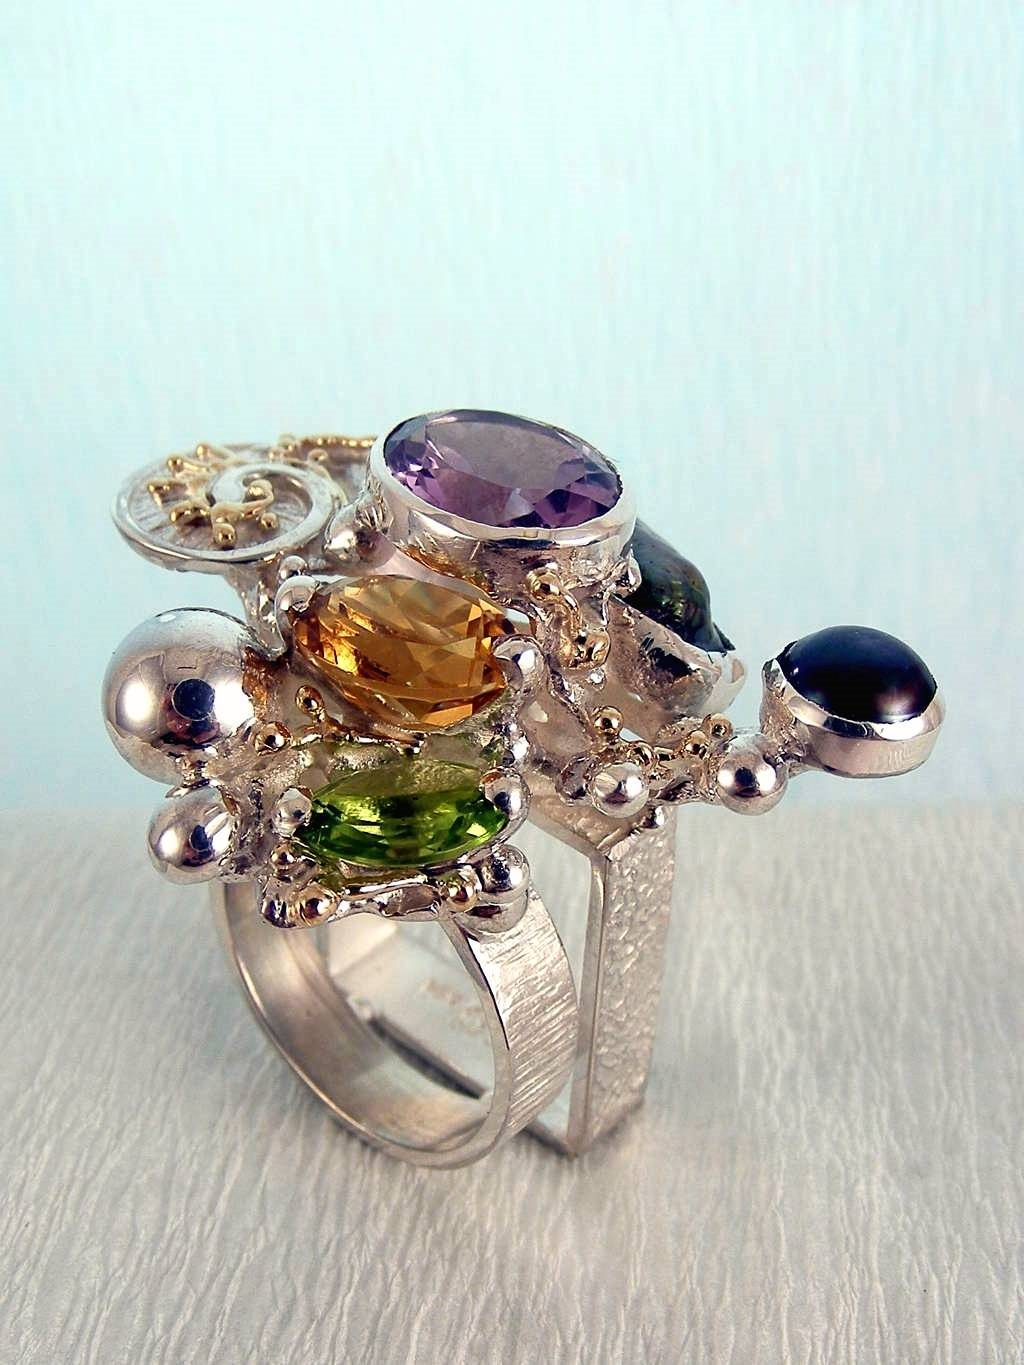 one of a kind ring in silver and gold, one of a kind mixed metal jewellery, gregory pyra piro cyber ring 1565, art jewellery in silver and gold, cyber rings for women with citrine and peridot, cyber rings for women with amethyst and peridot